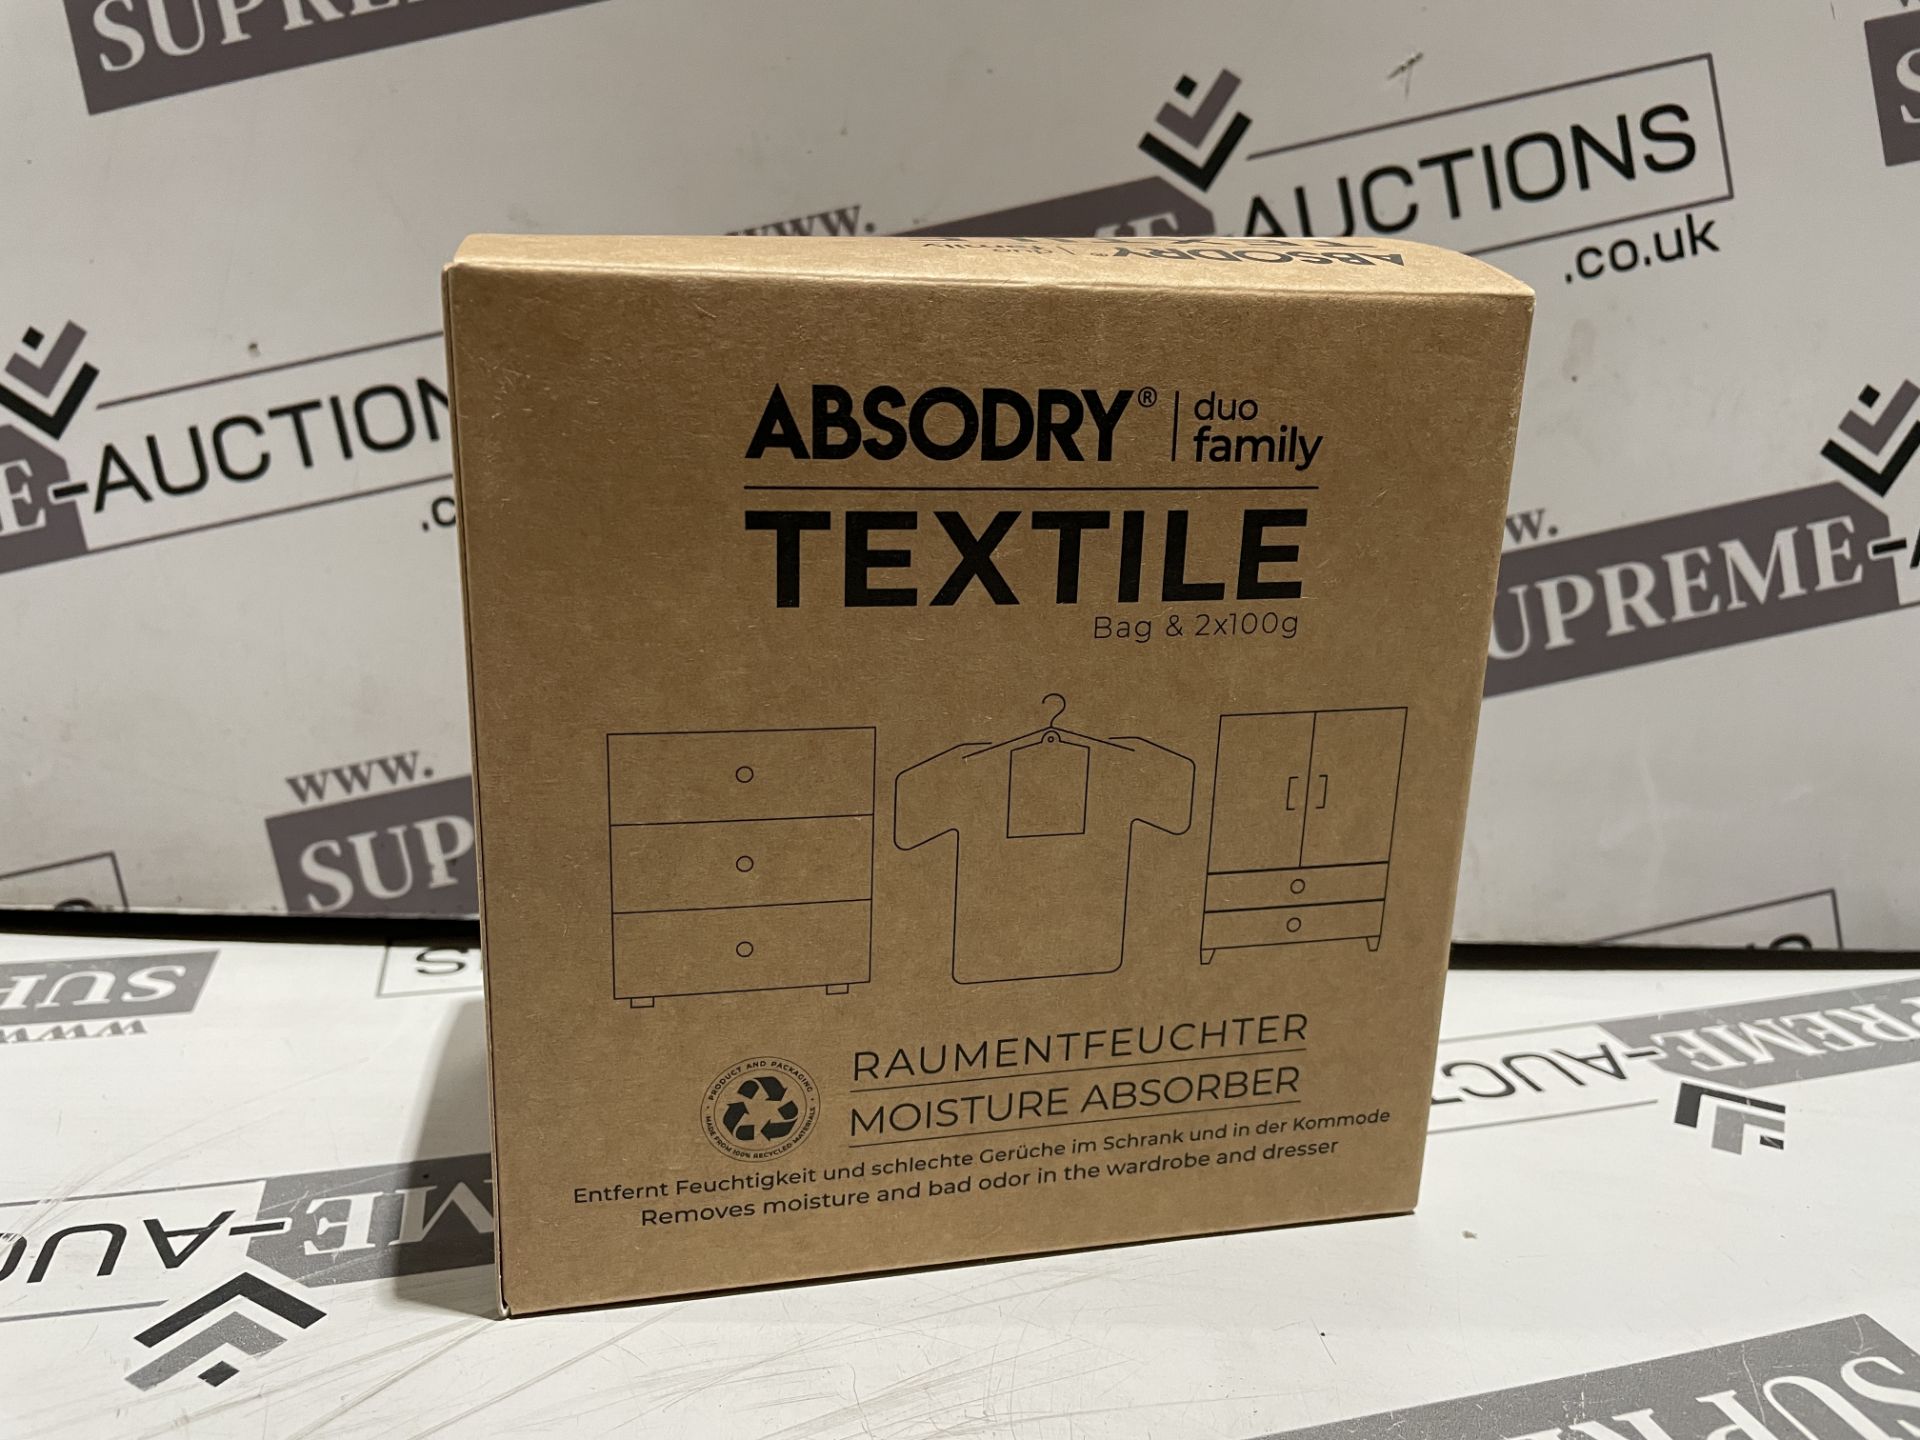 15 X BRAND NEW ABSODRY DUO FAMILY TEXTILE BAG AND 2 X100G R9-8